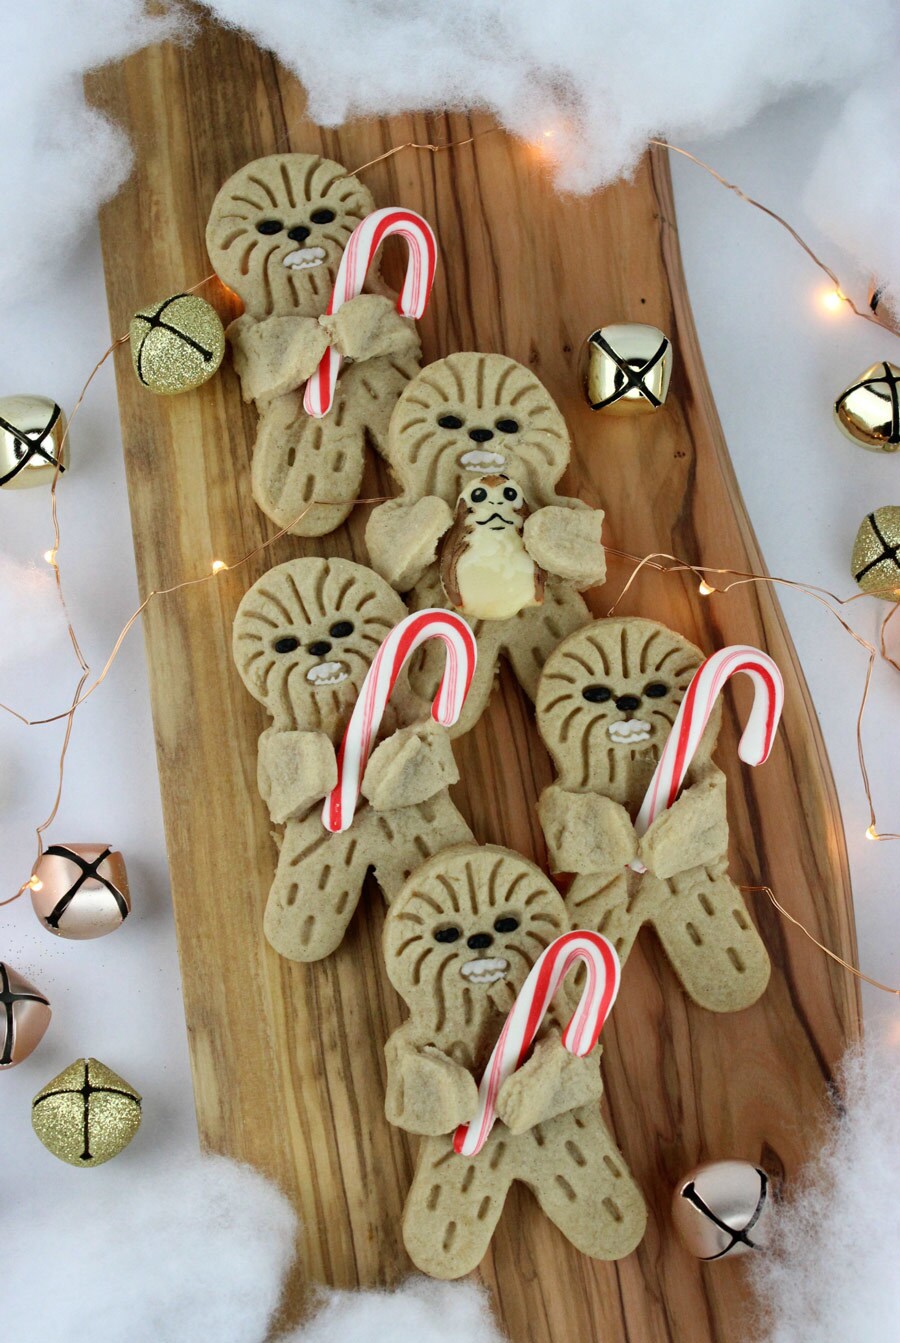 Holiday Hug Wookiee Cookies. Five cookies, in the shape of Wookiees, lie on a wooden board hugging candy canes.